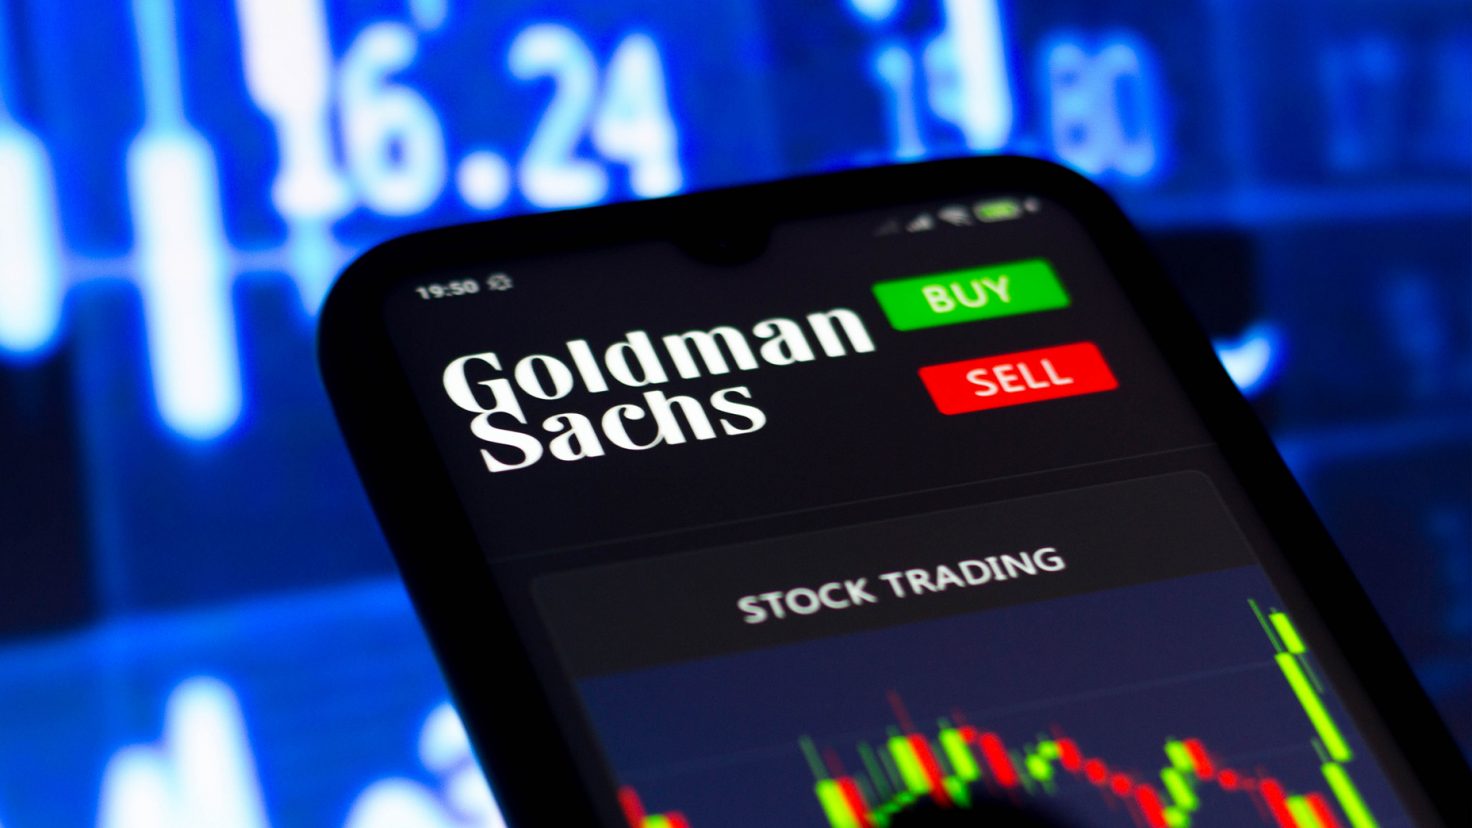 Goldman Sachs Group report: revenue did not live up to expectations again